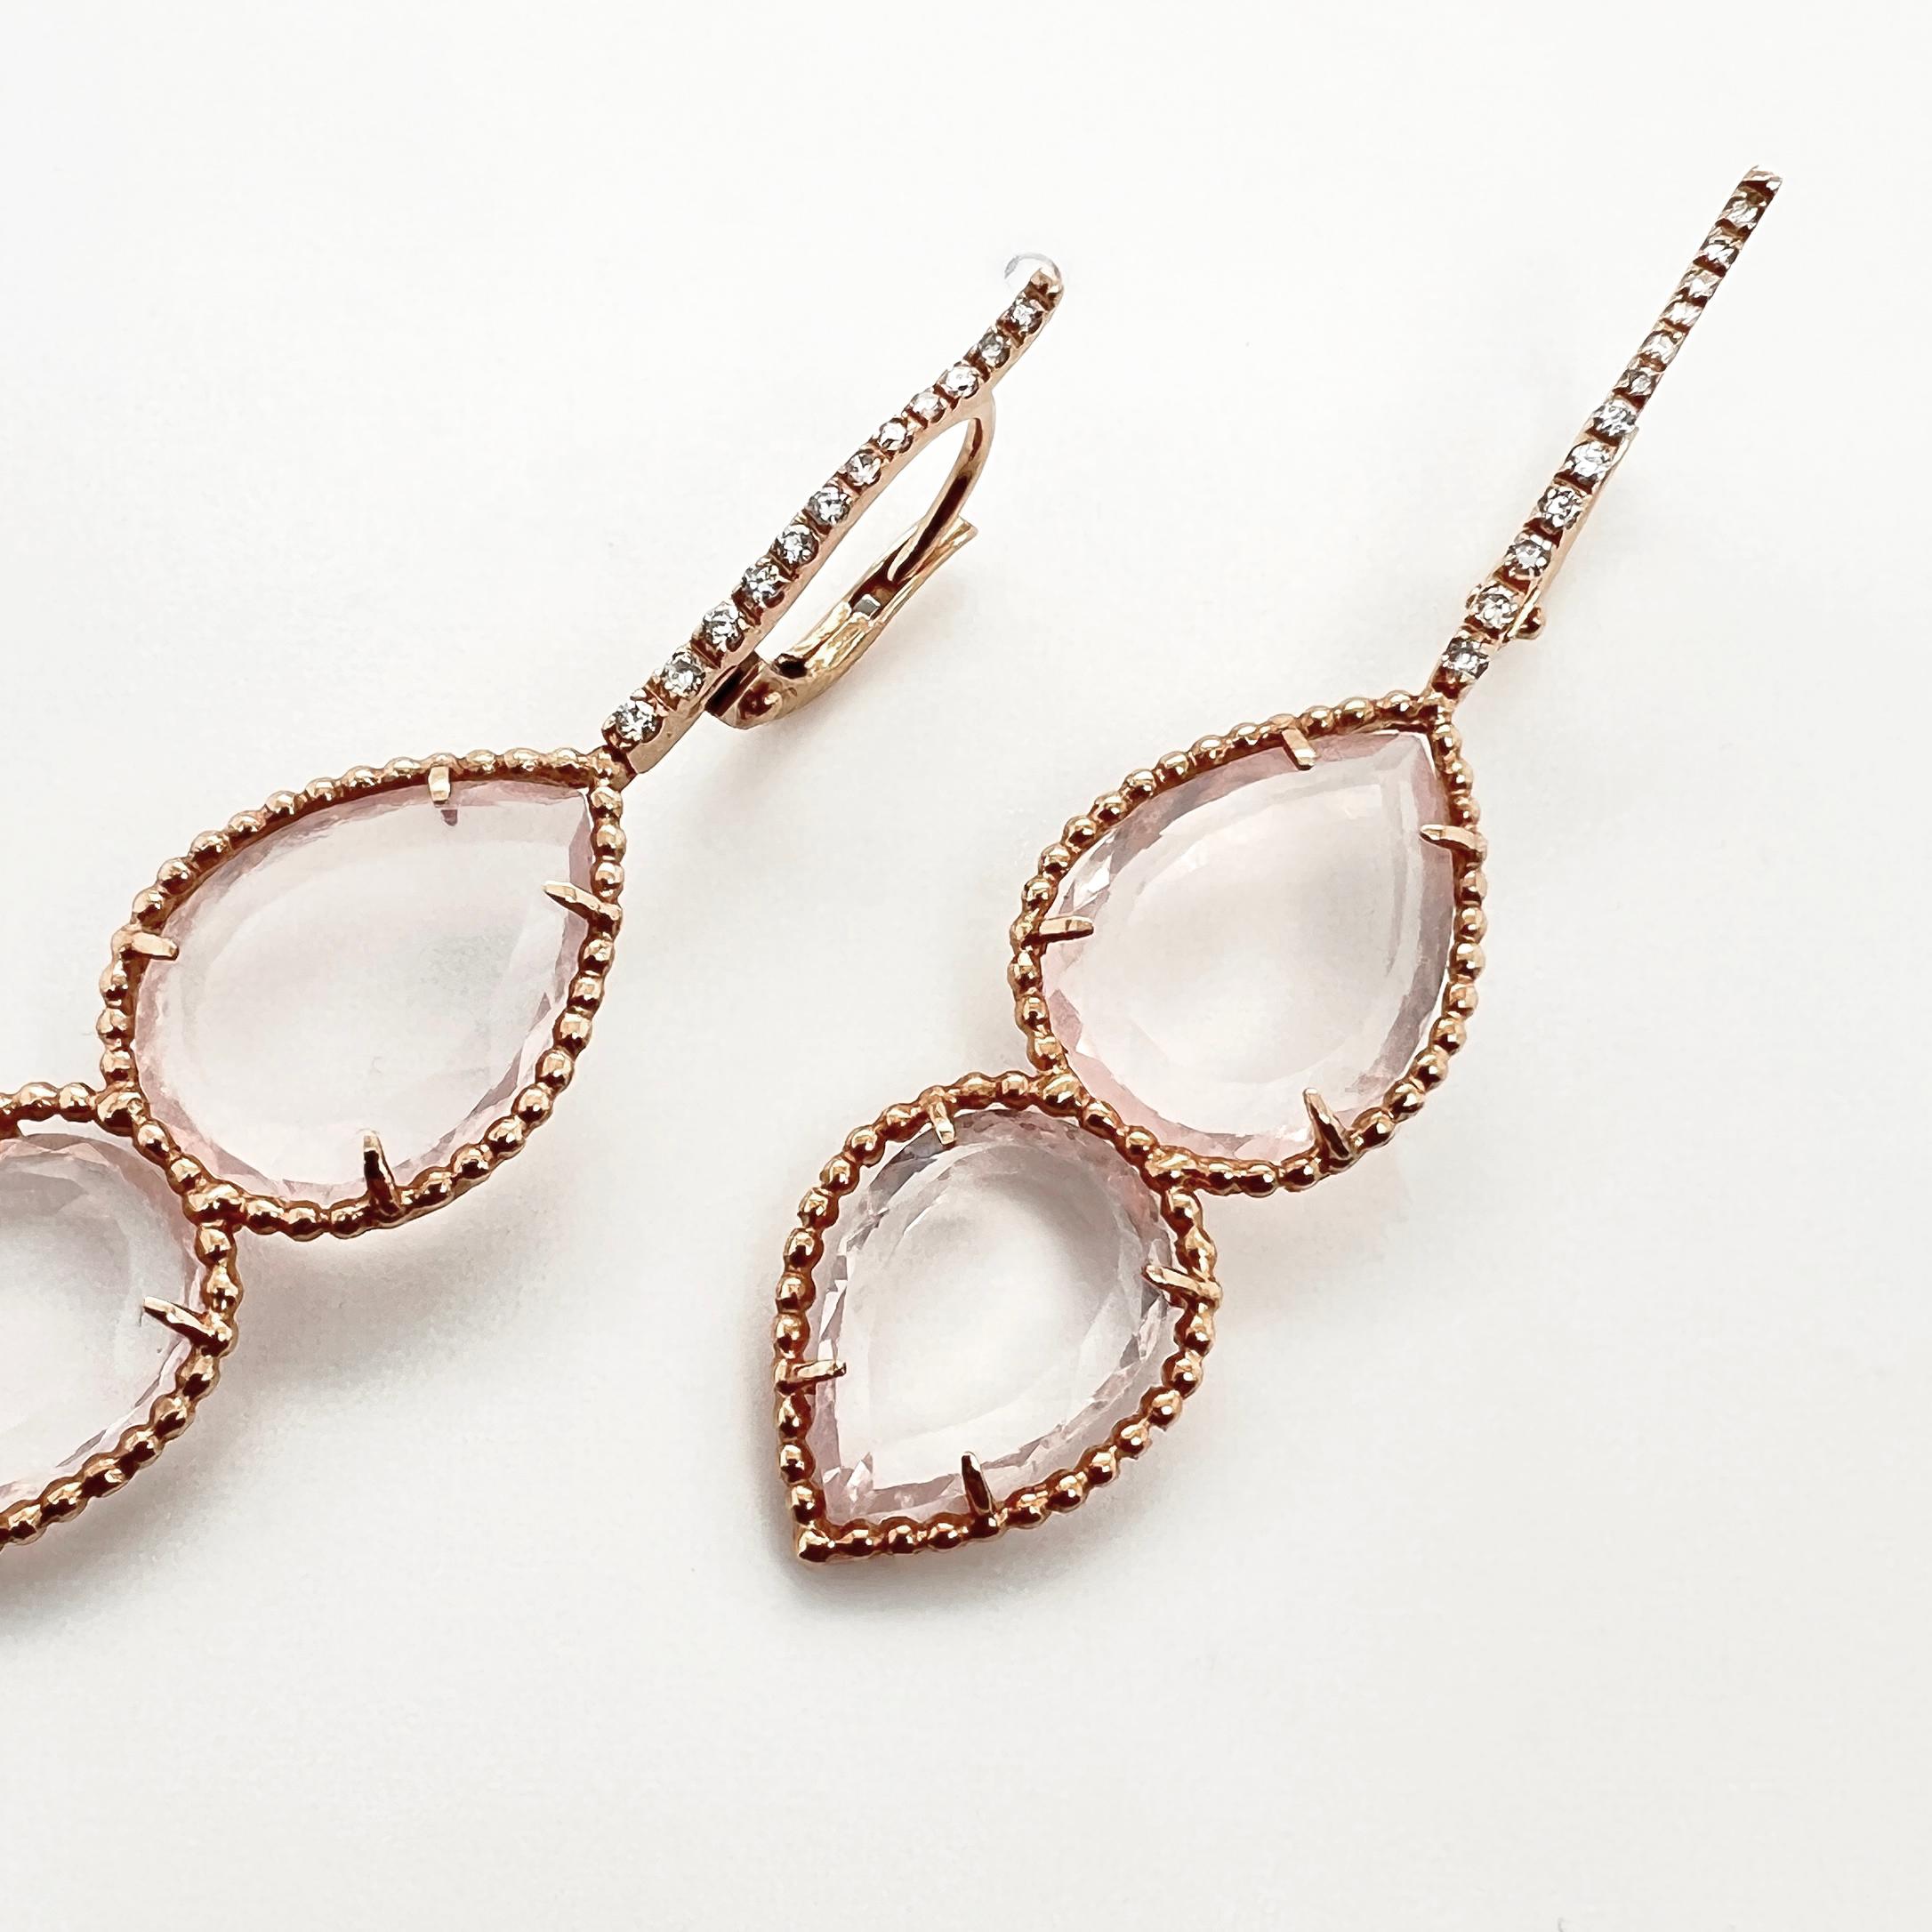 All of our jewellery is made by Italian Artisans to guarantee the Made In Italy manufacturing. 

The 18kt Pink Gold Earrings with Pink Quartz and Natural Diamonds is an everyday piece of jewelry. 

The natural diamonds in the earrings add an extra